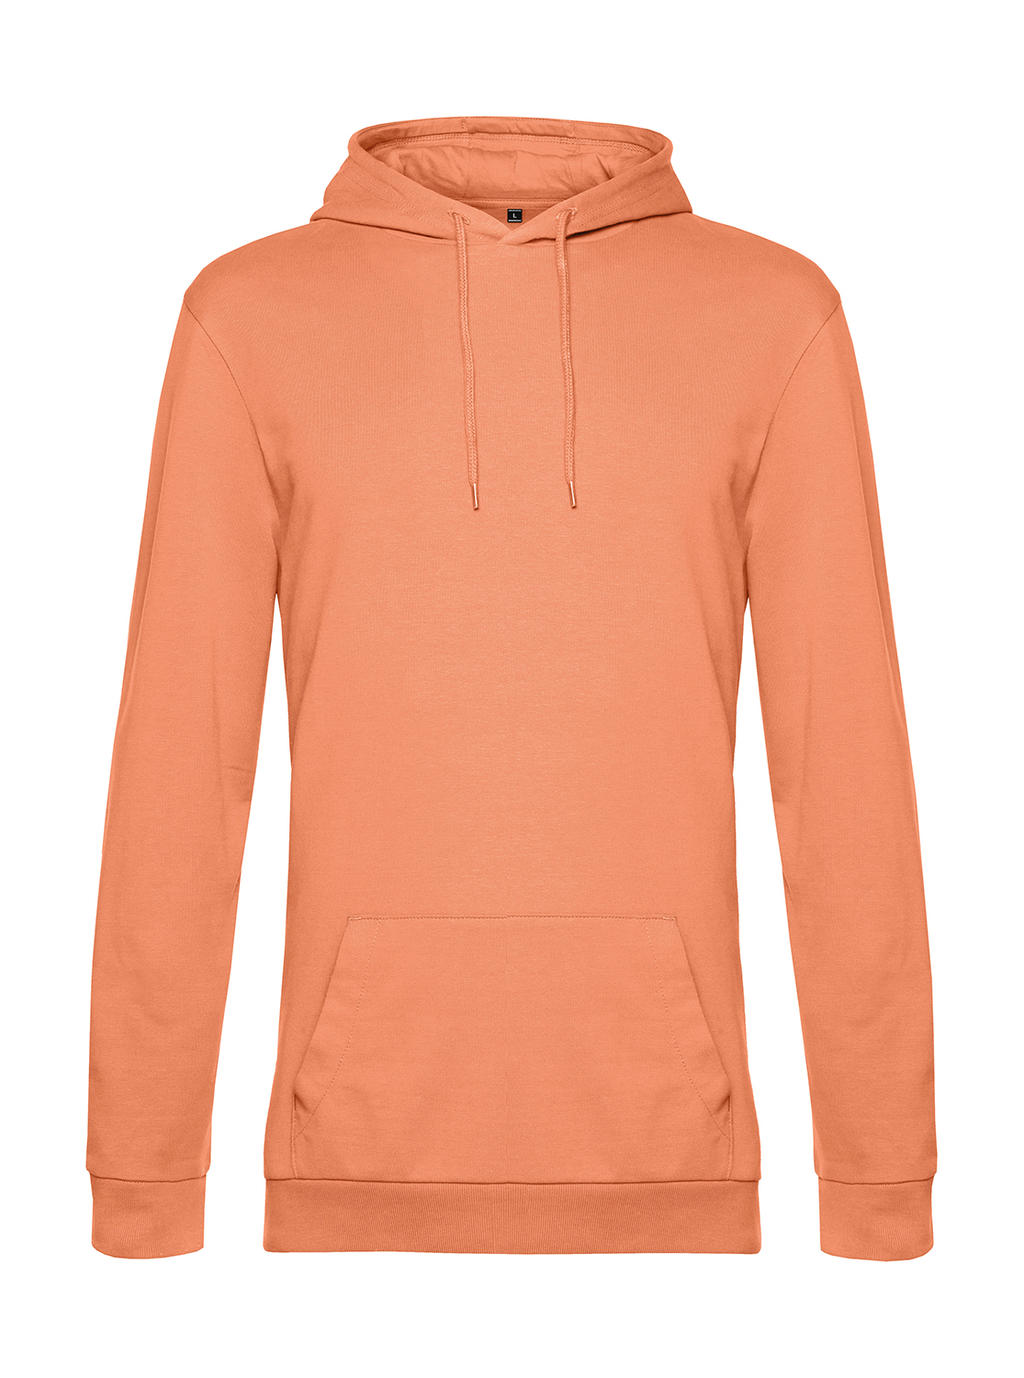  #Hoodie French Terry in Farbe Melon Orange